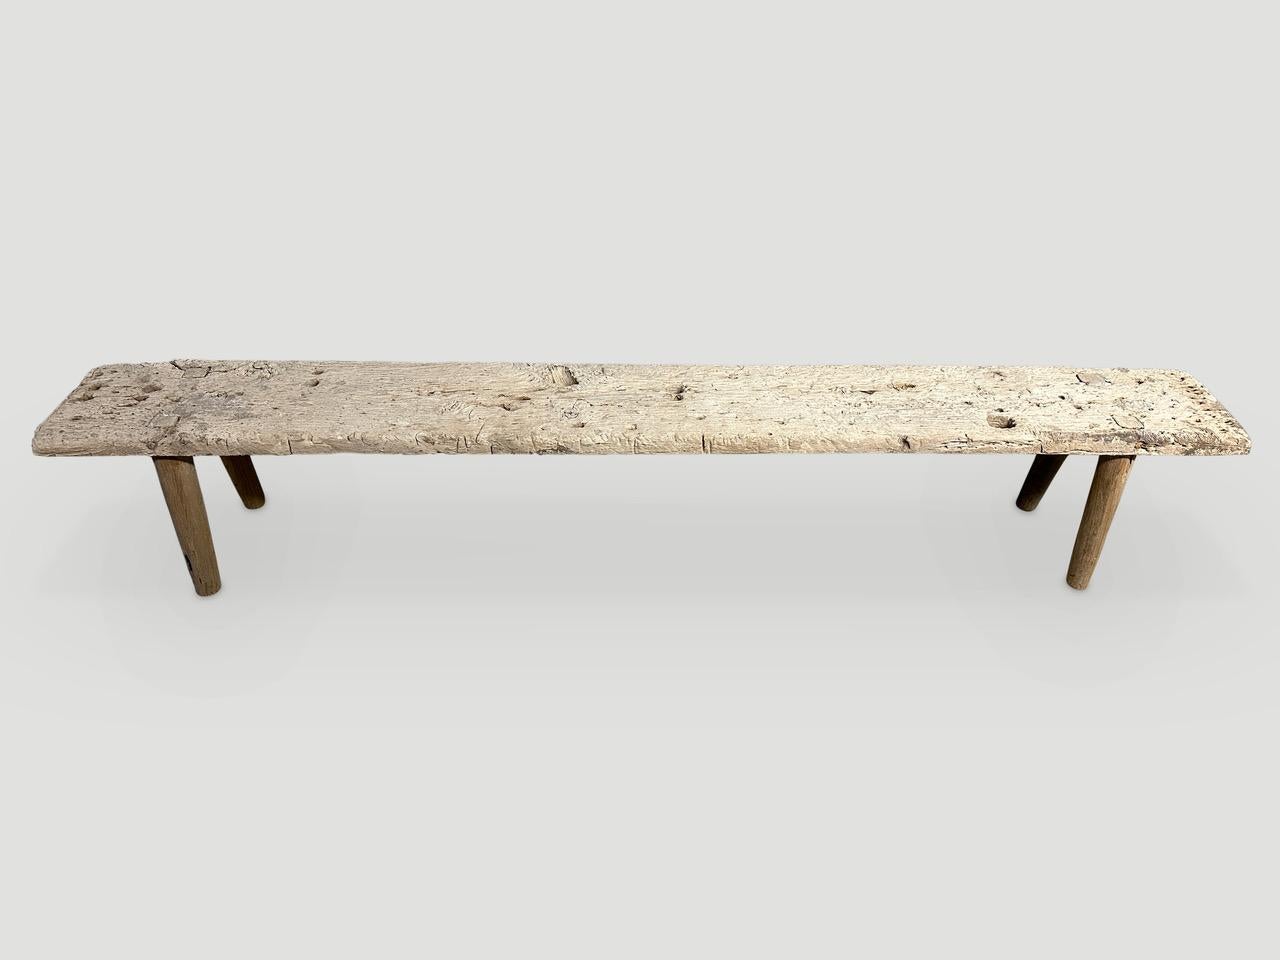 Andrianna Shamaris Antique Teak Wood Wabi Sabi Bench In Excellent Condition For Sale In New York, NY